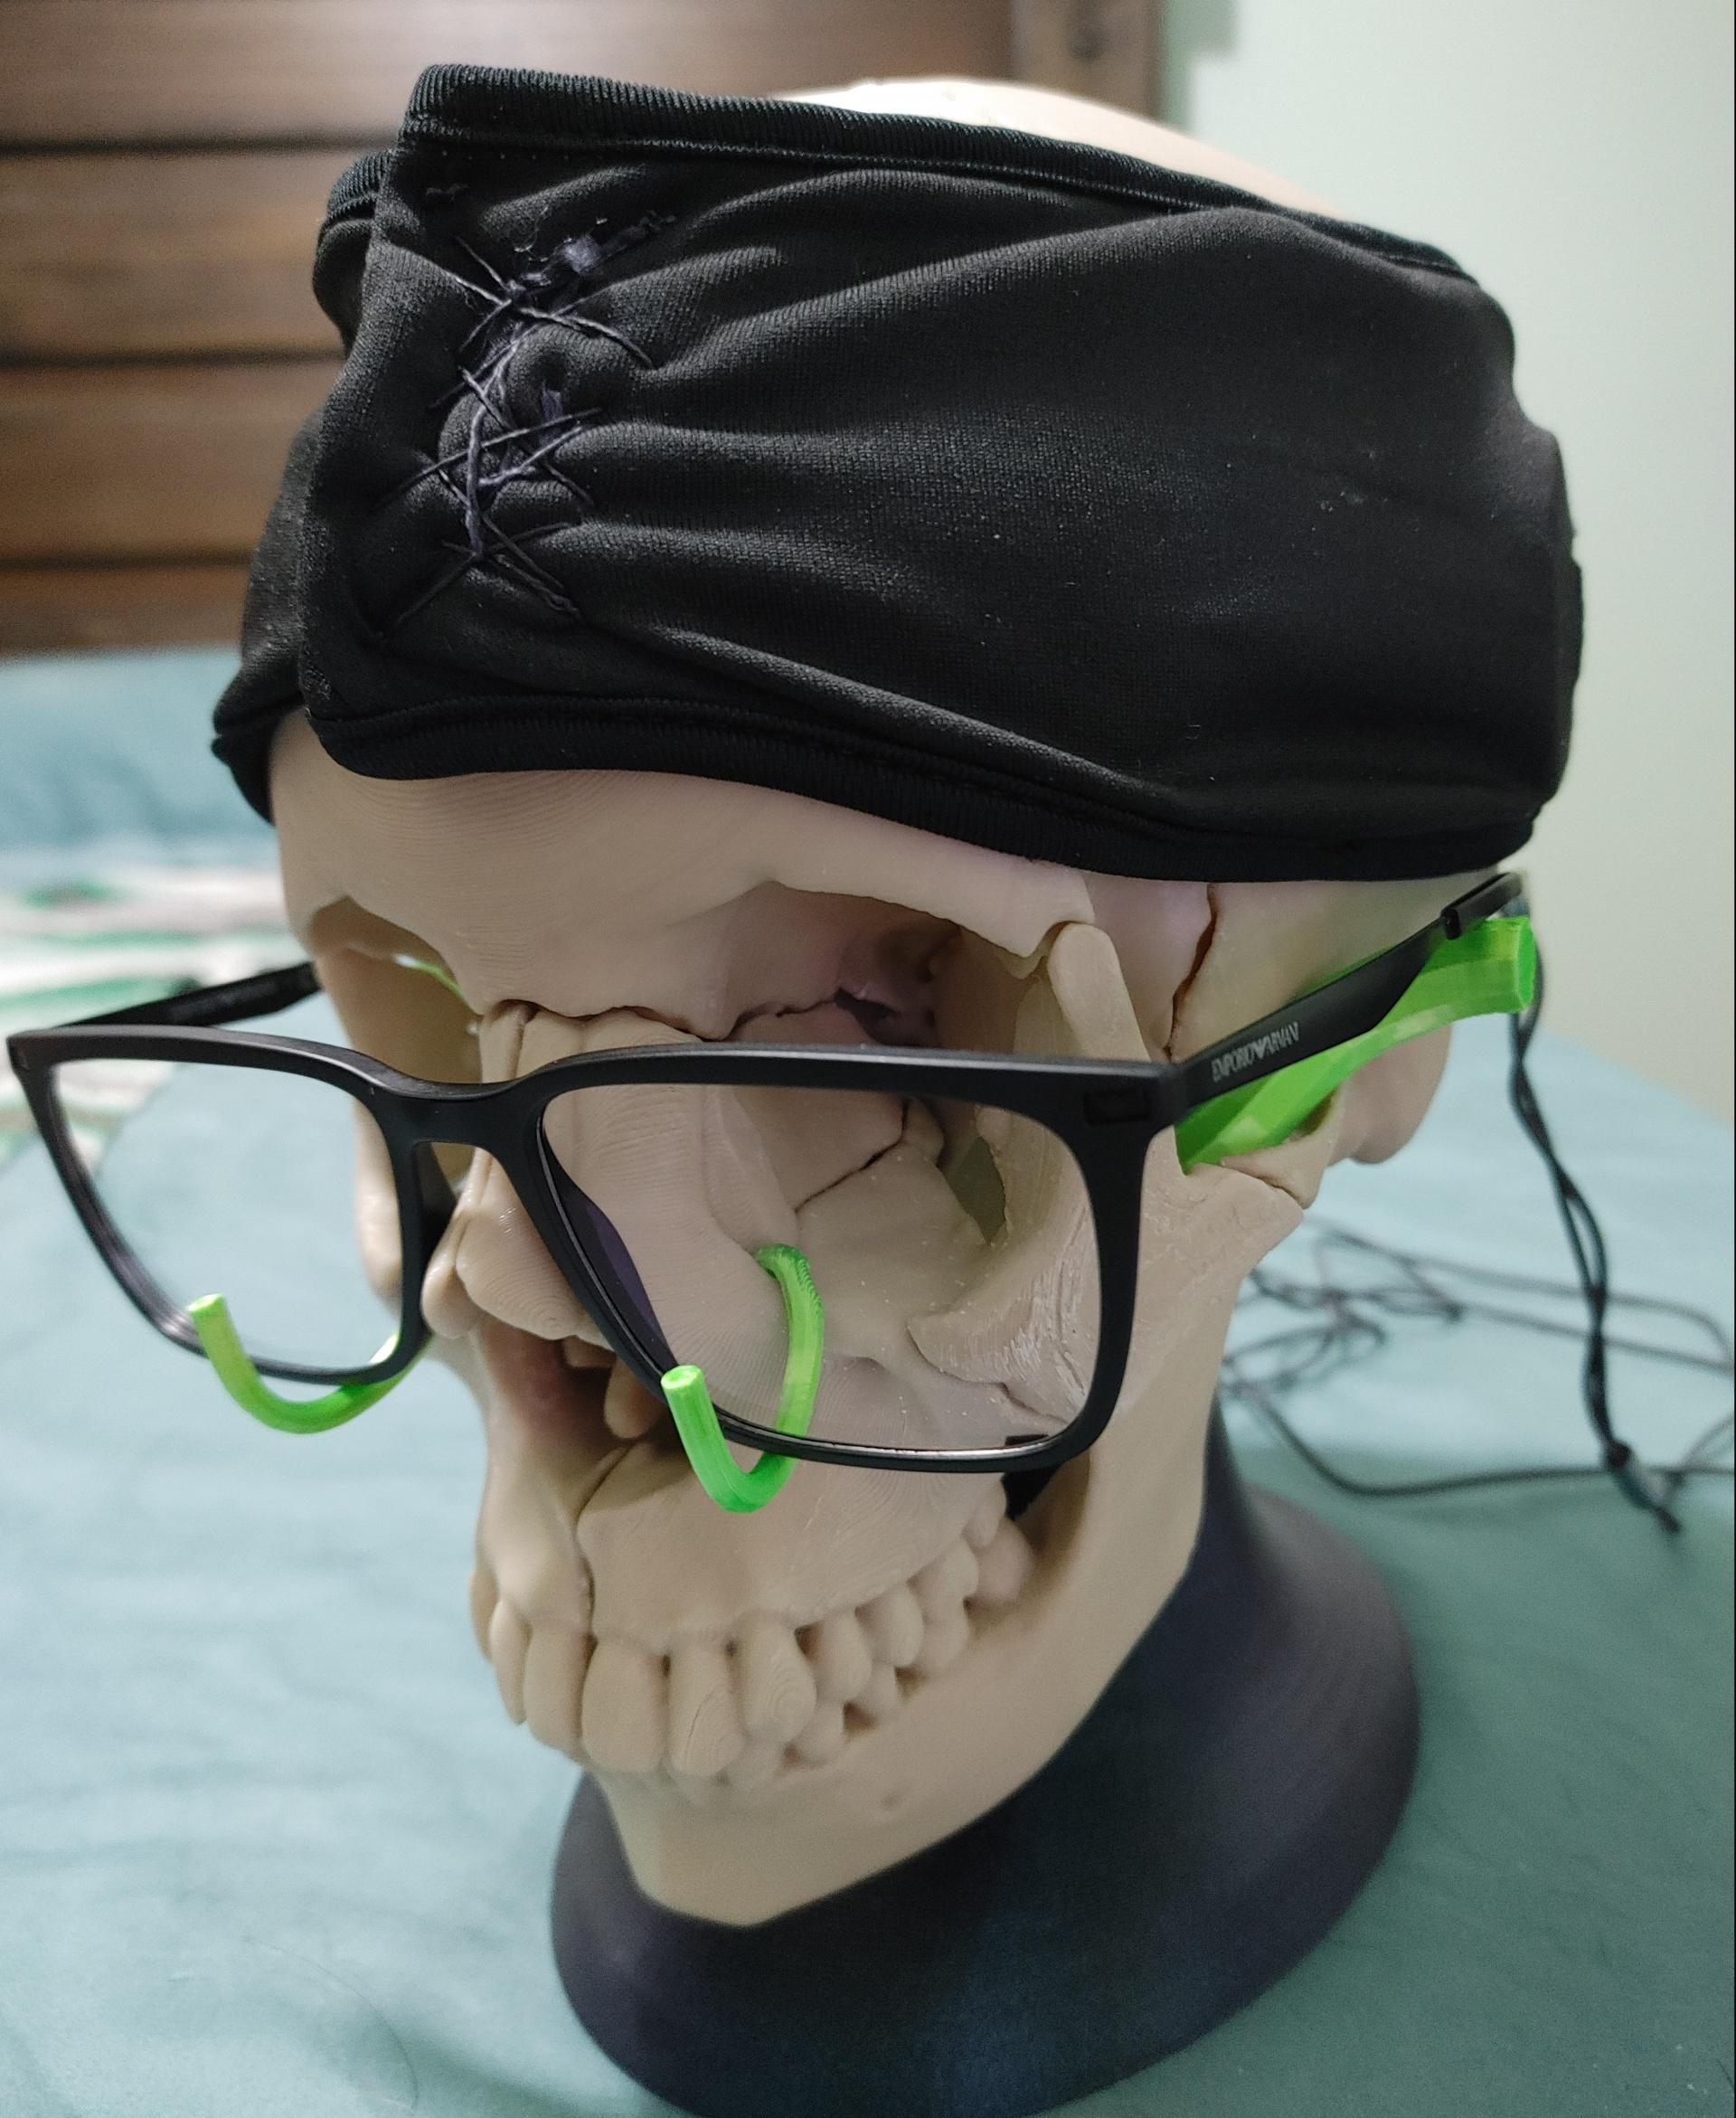 Full Size Anatomically-Correct 18-Piece Magnetic Human Skull Model - Skull was made in eSUN PLA+ Bone White at 0.2mm layer height and 15% infill. I added my own glasses holders in the lime green.

To answers the questions in my other comment:
1. YES. The magnets feel plenty strong for the headband and even for shaking the skull somewhat hard. I didn't print this solid, so it's still pretty light weight, but heavier prints would likely still hold as the recommended magnets at N52 are really strong.

2. Clearly yes as you can see in the image. The gap between the pterygoid plate and foramen magnum the stand goes through is plenty big. - 3d model